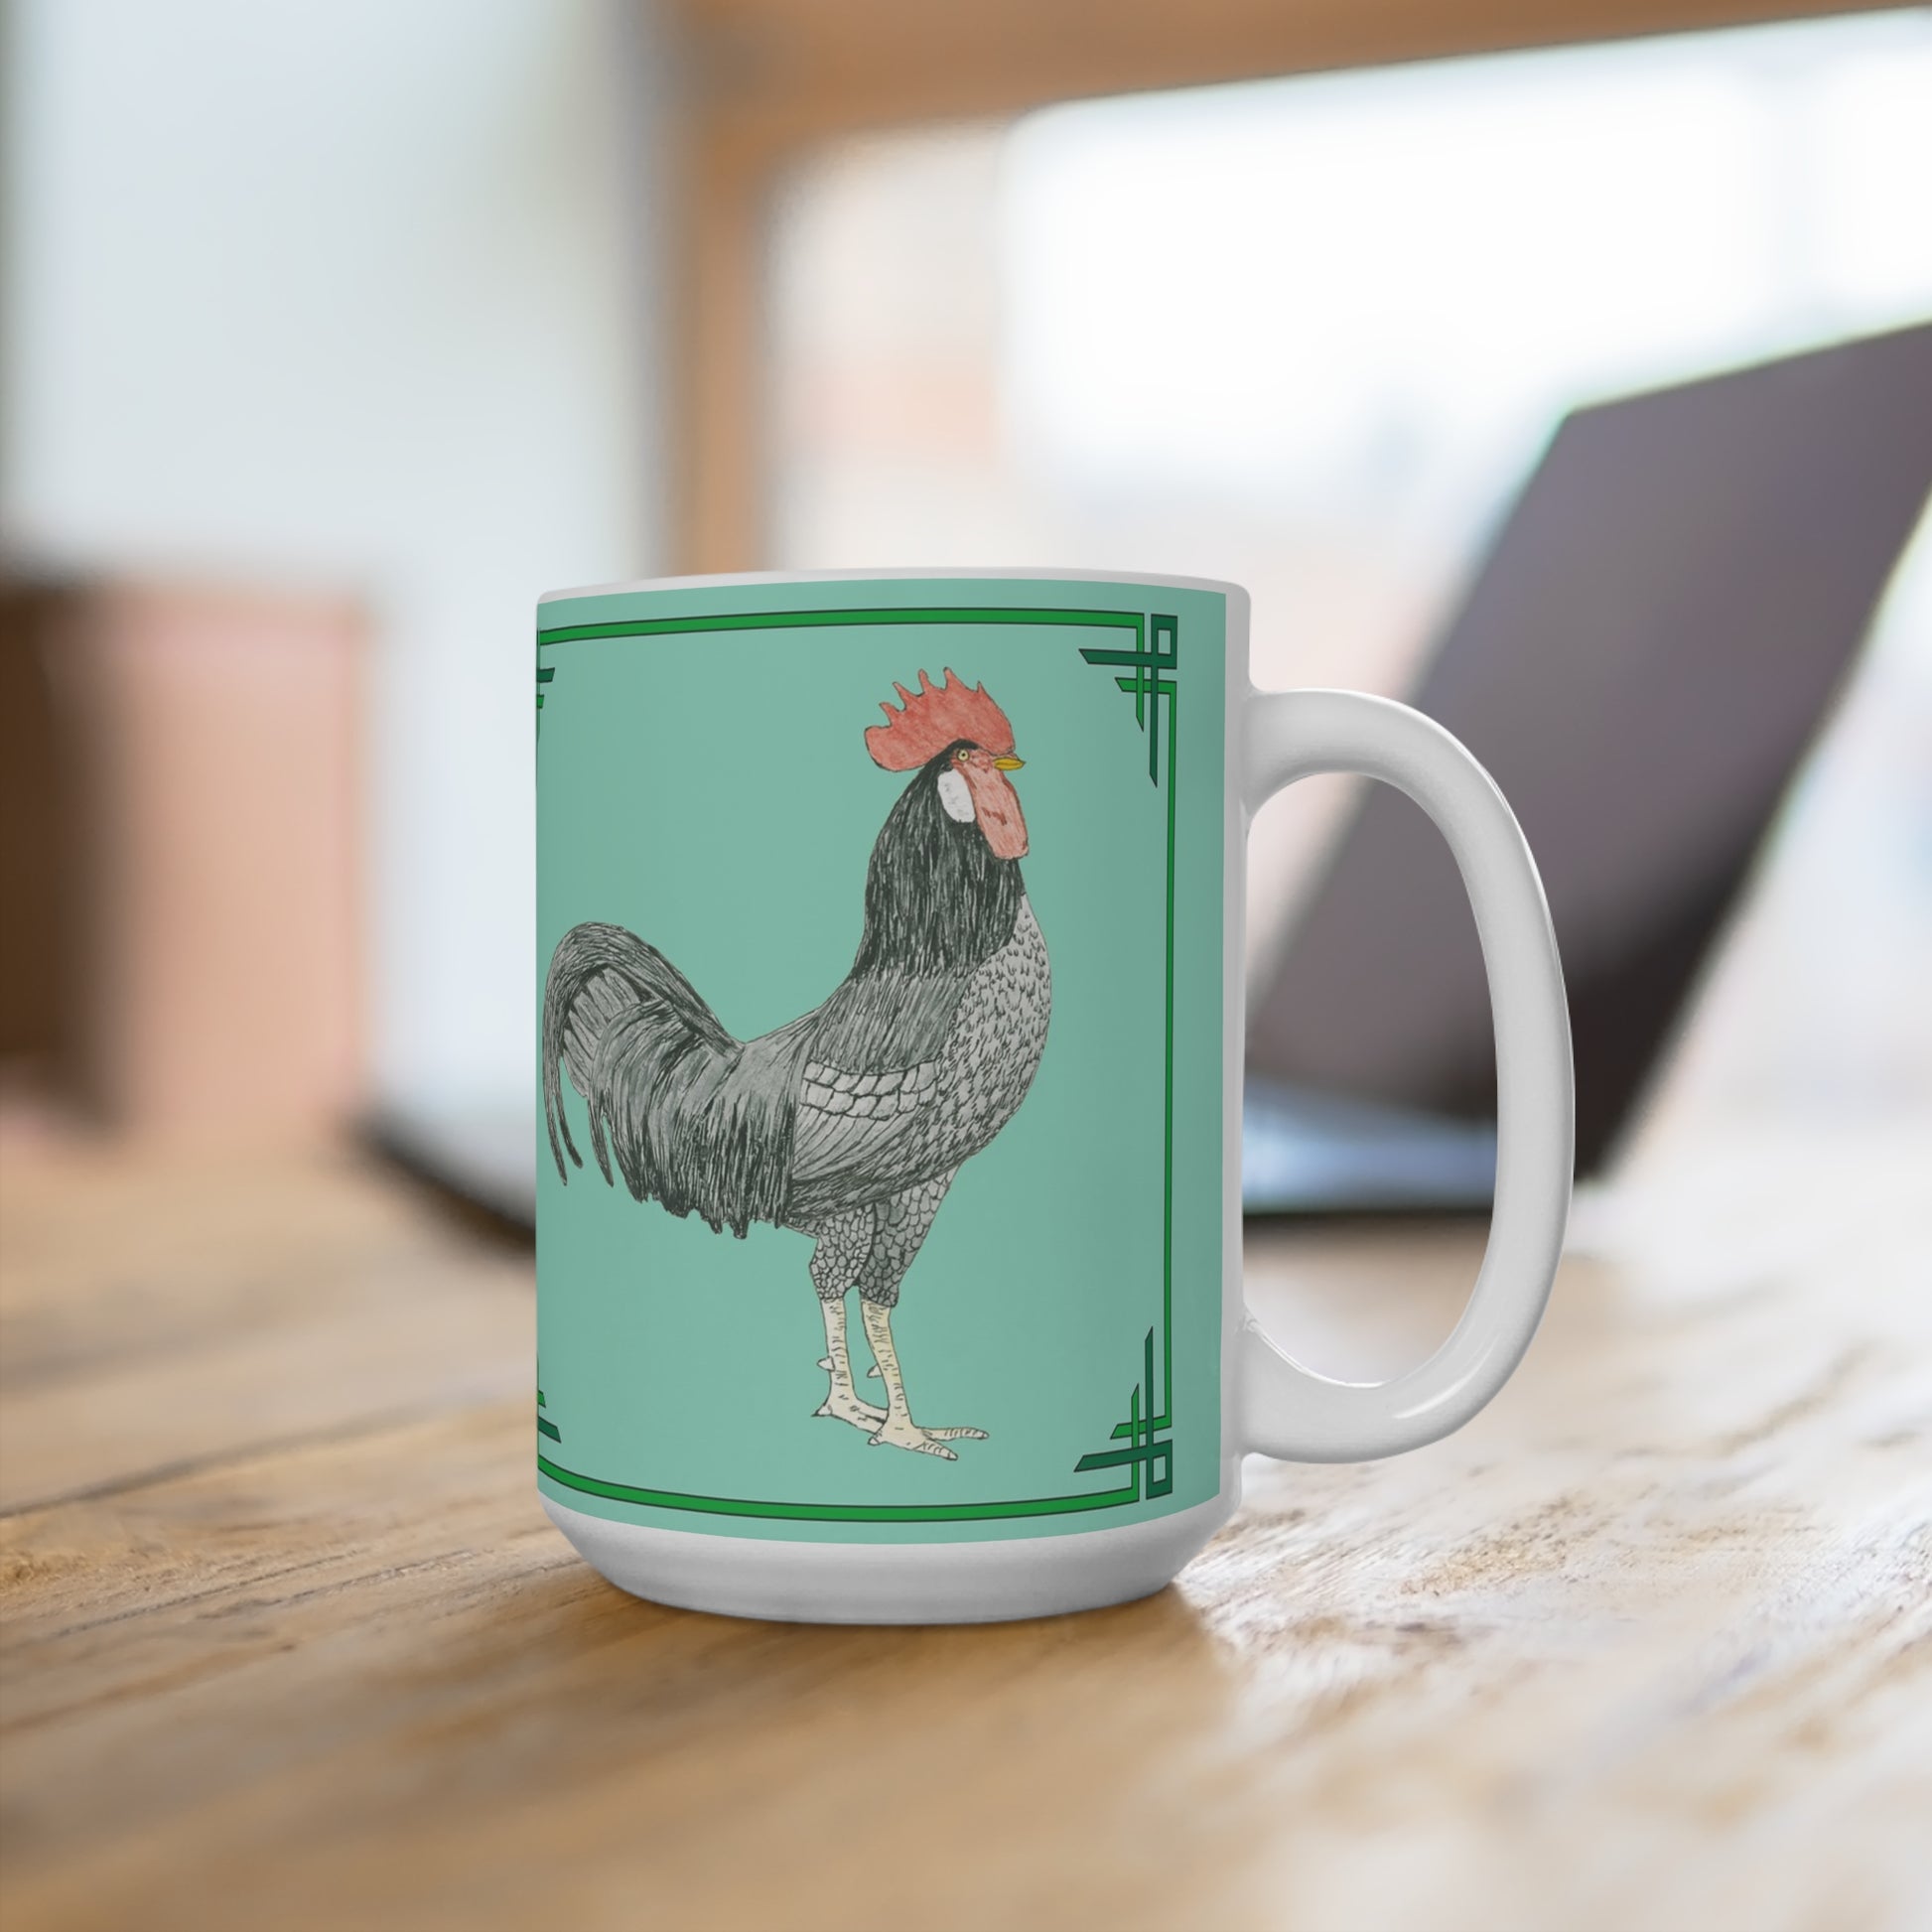 Enjoy your favorite beverage while you work on the laptop with our 11 oz. Adam Rooster mug